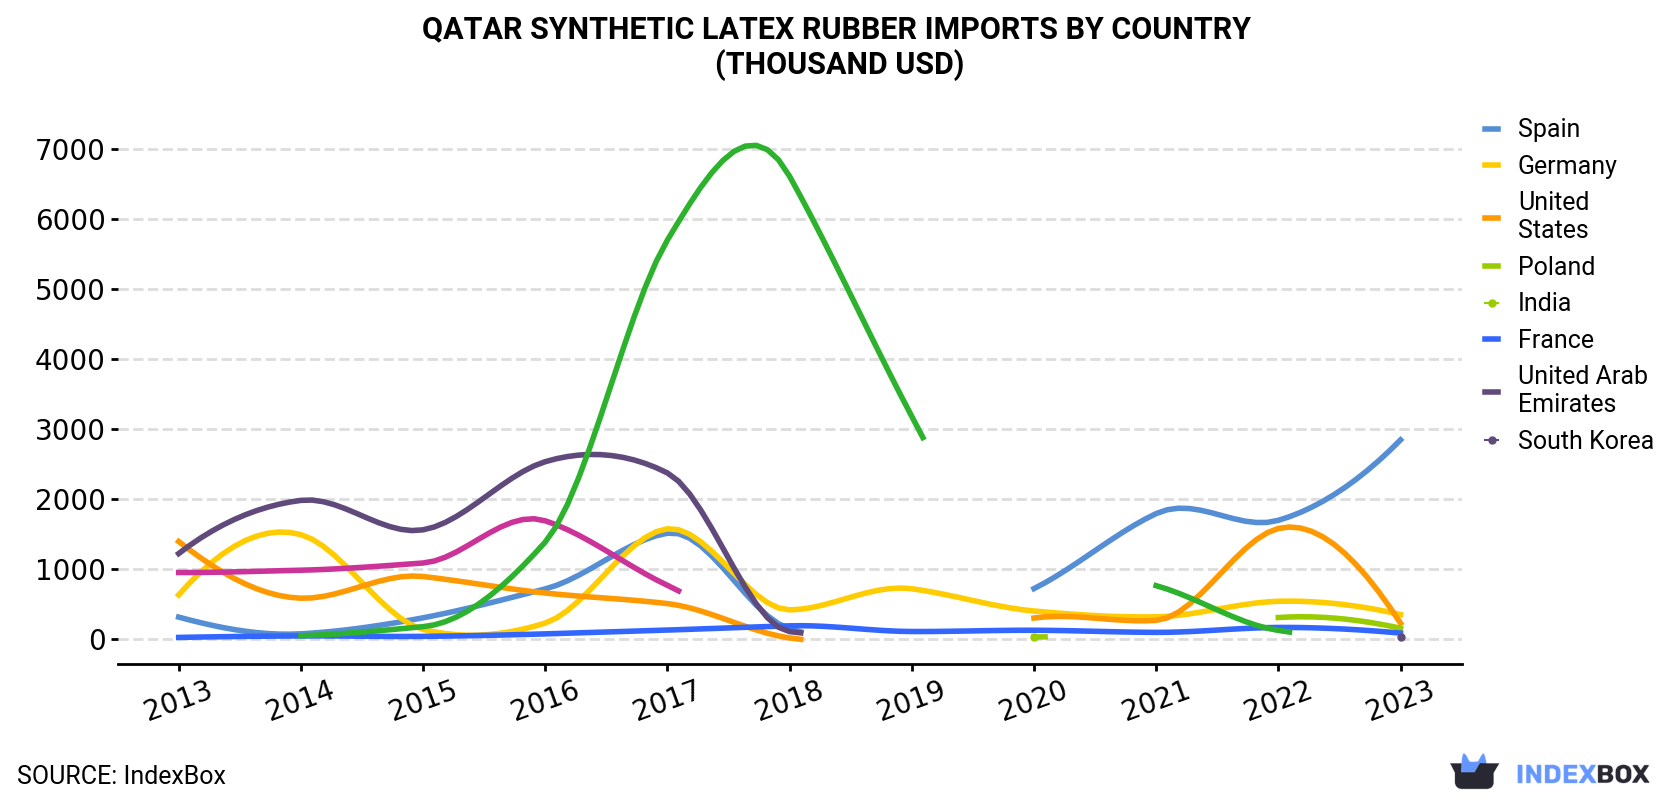 Qatar Synthetic Latex Rubber Imports By Country (Thousand USD)